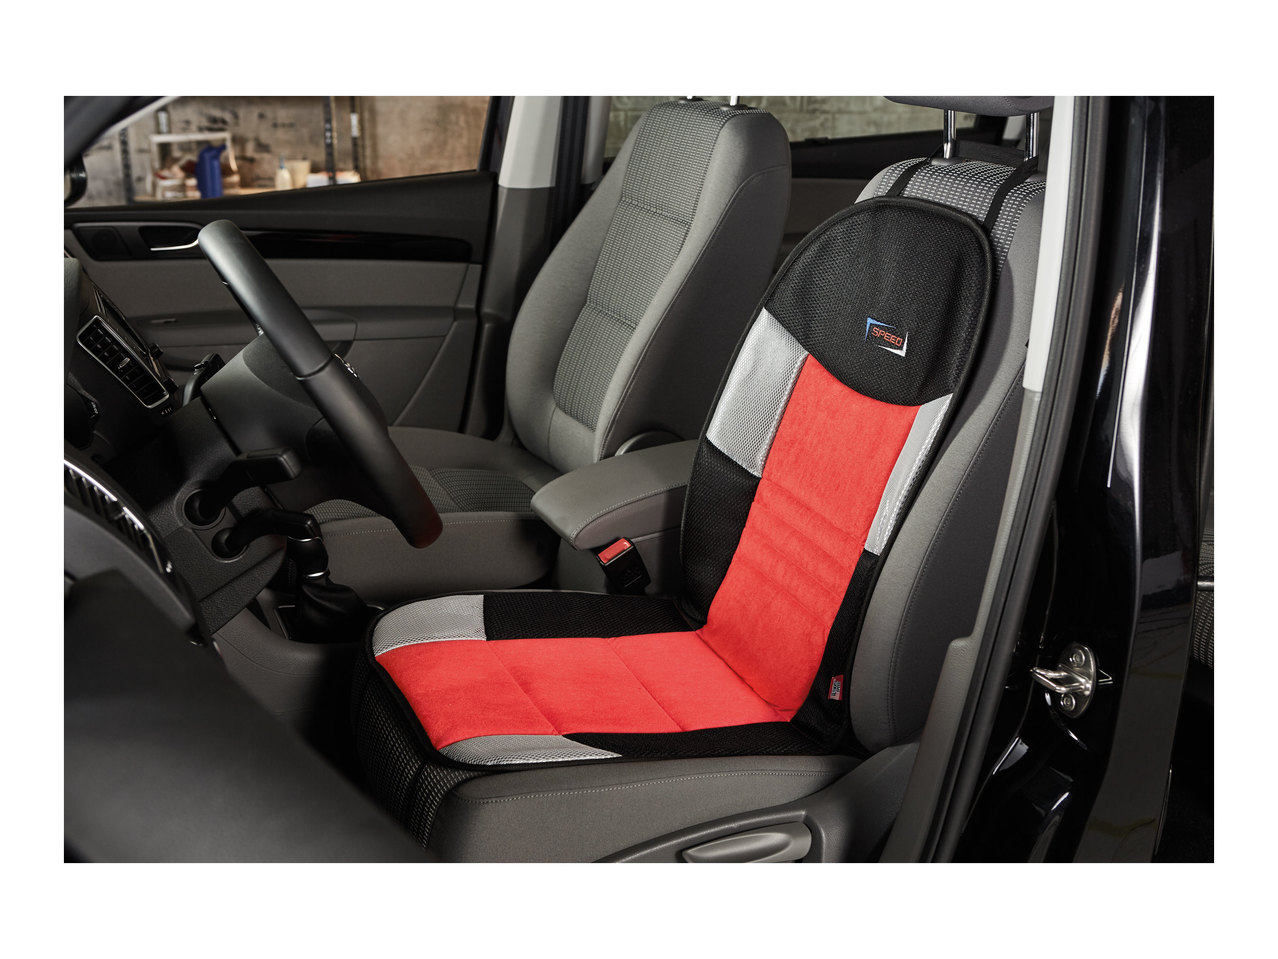 Ultimate Speed Padded Car Seat Cover1